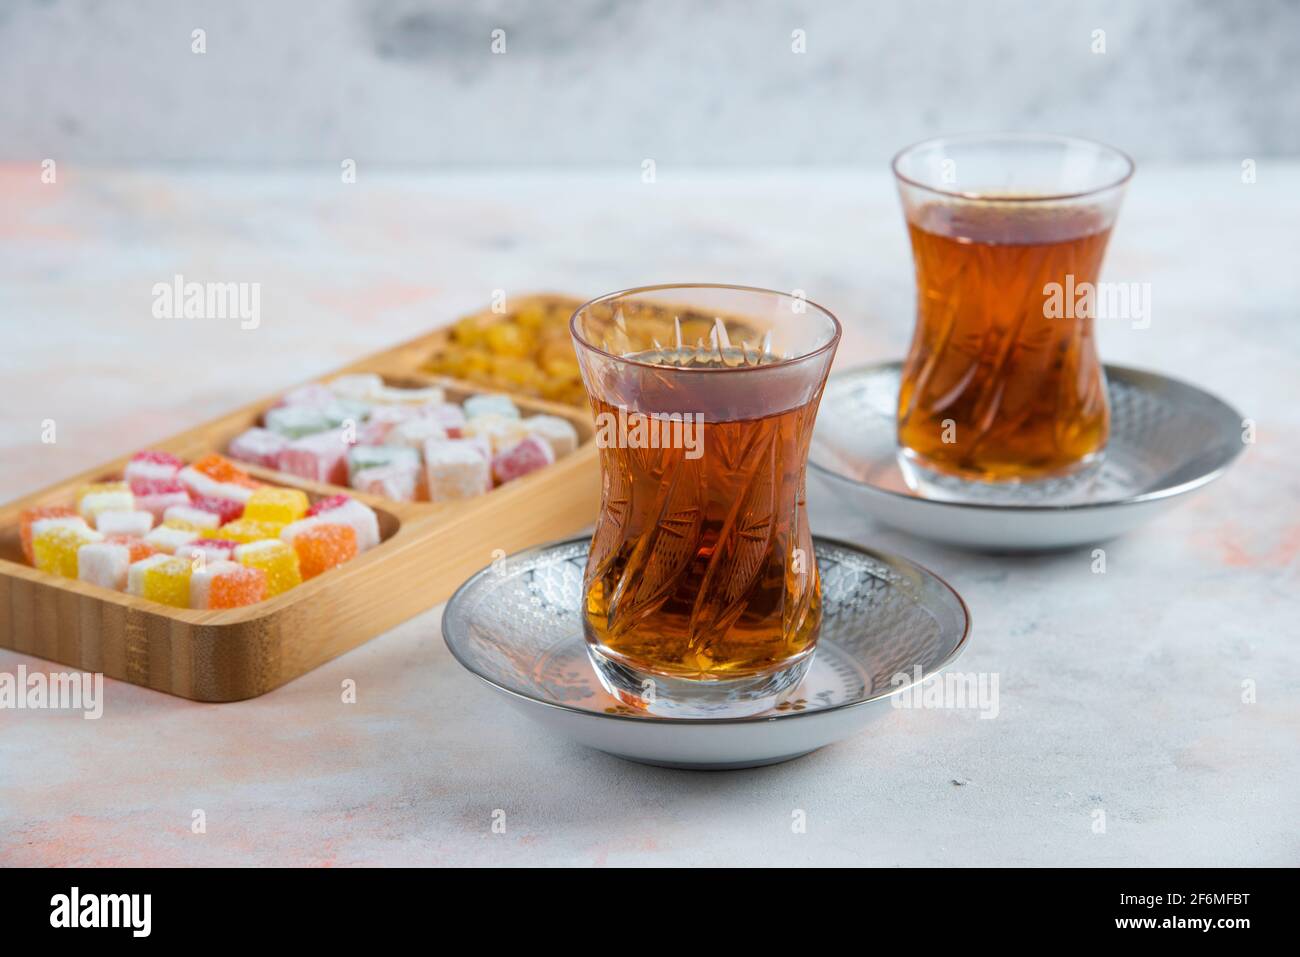 Close up photo of Two glass tea and turkish delights Stock Photo